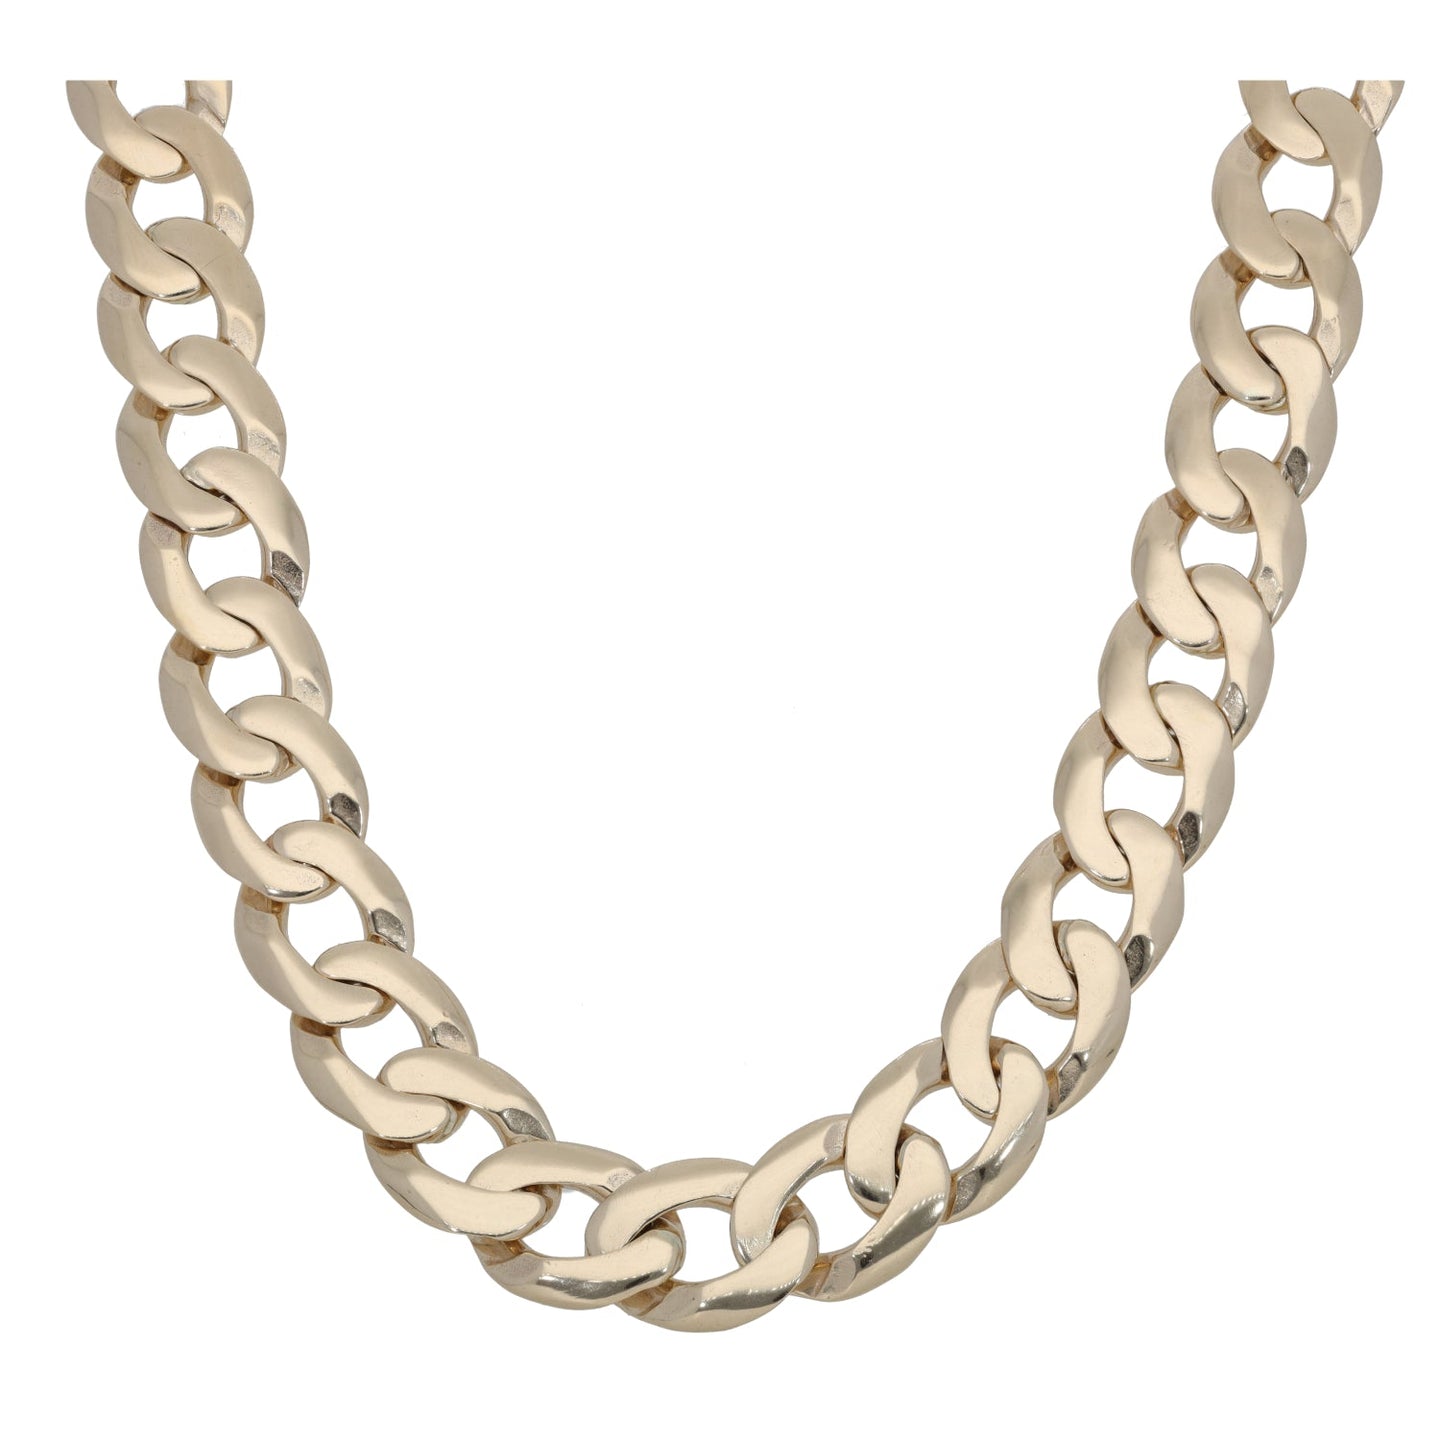 New 9ct Gold Curb Chain/Necklace